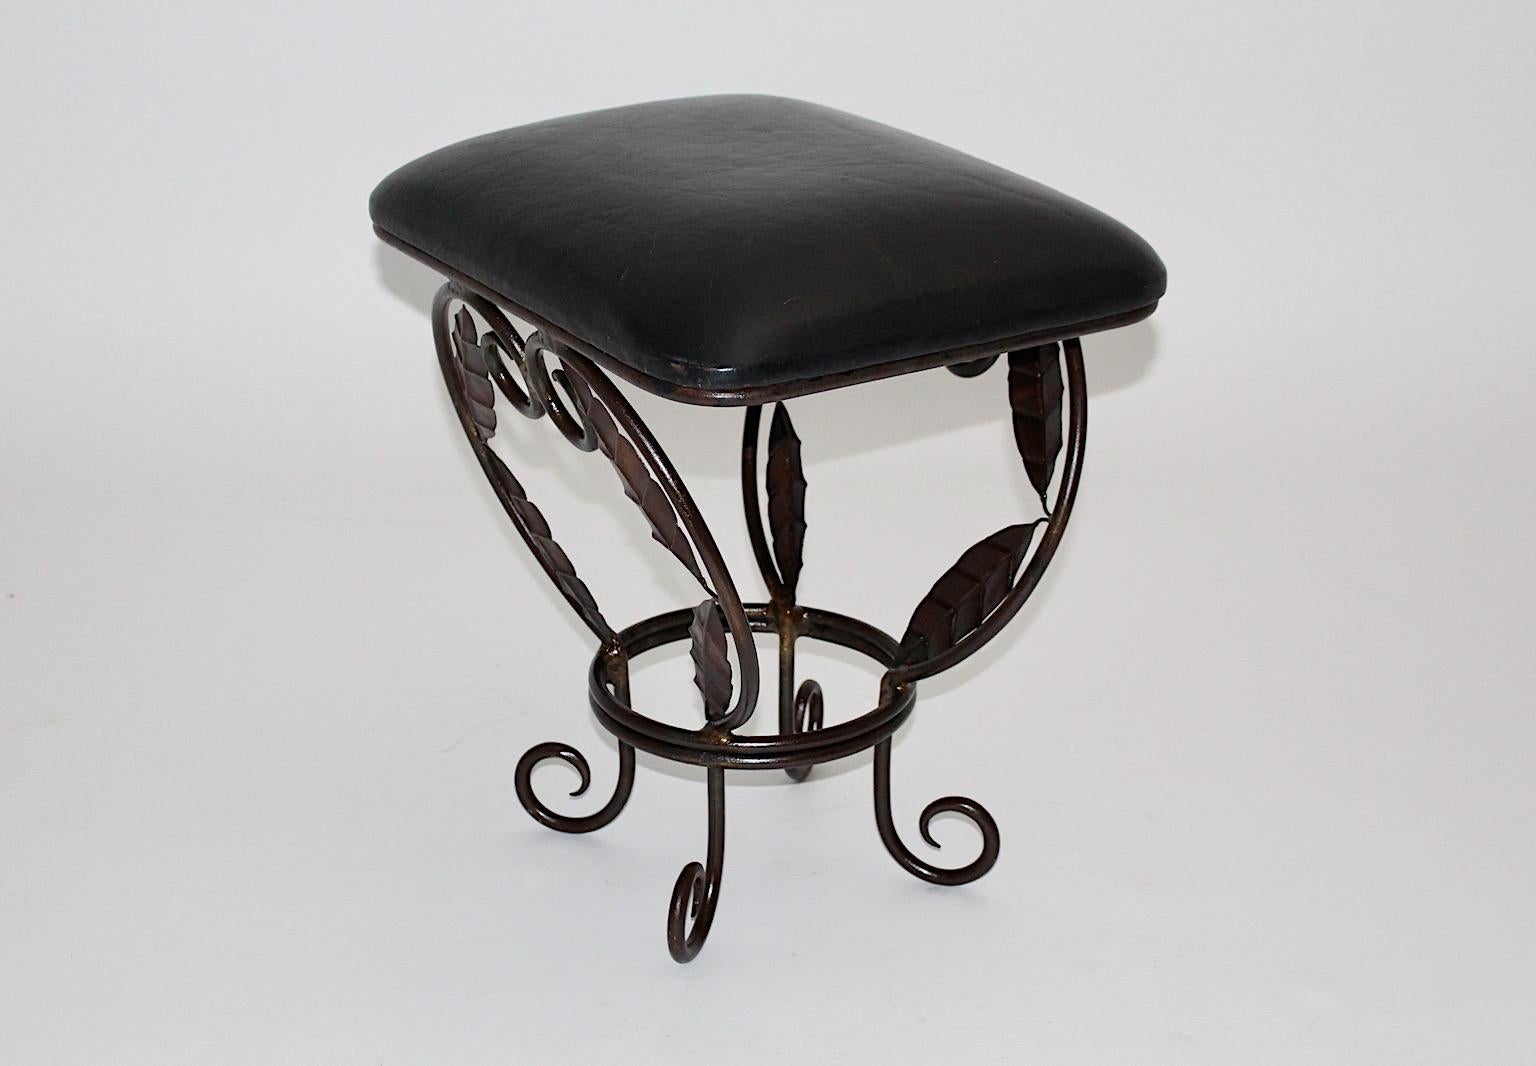 20th Century Vintage Brown Metal Stool Ottoman with Leaves Black Leather Seat, 1970s, France For Sale